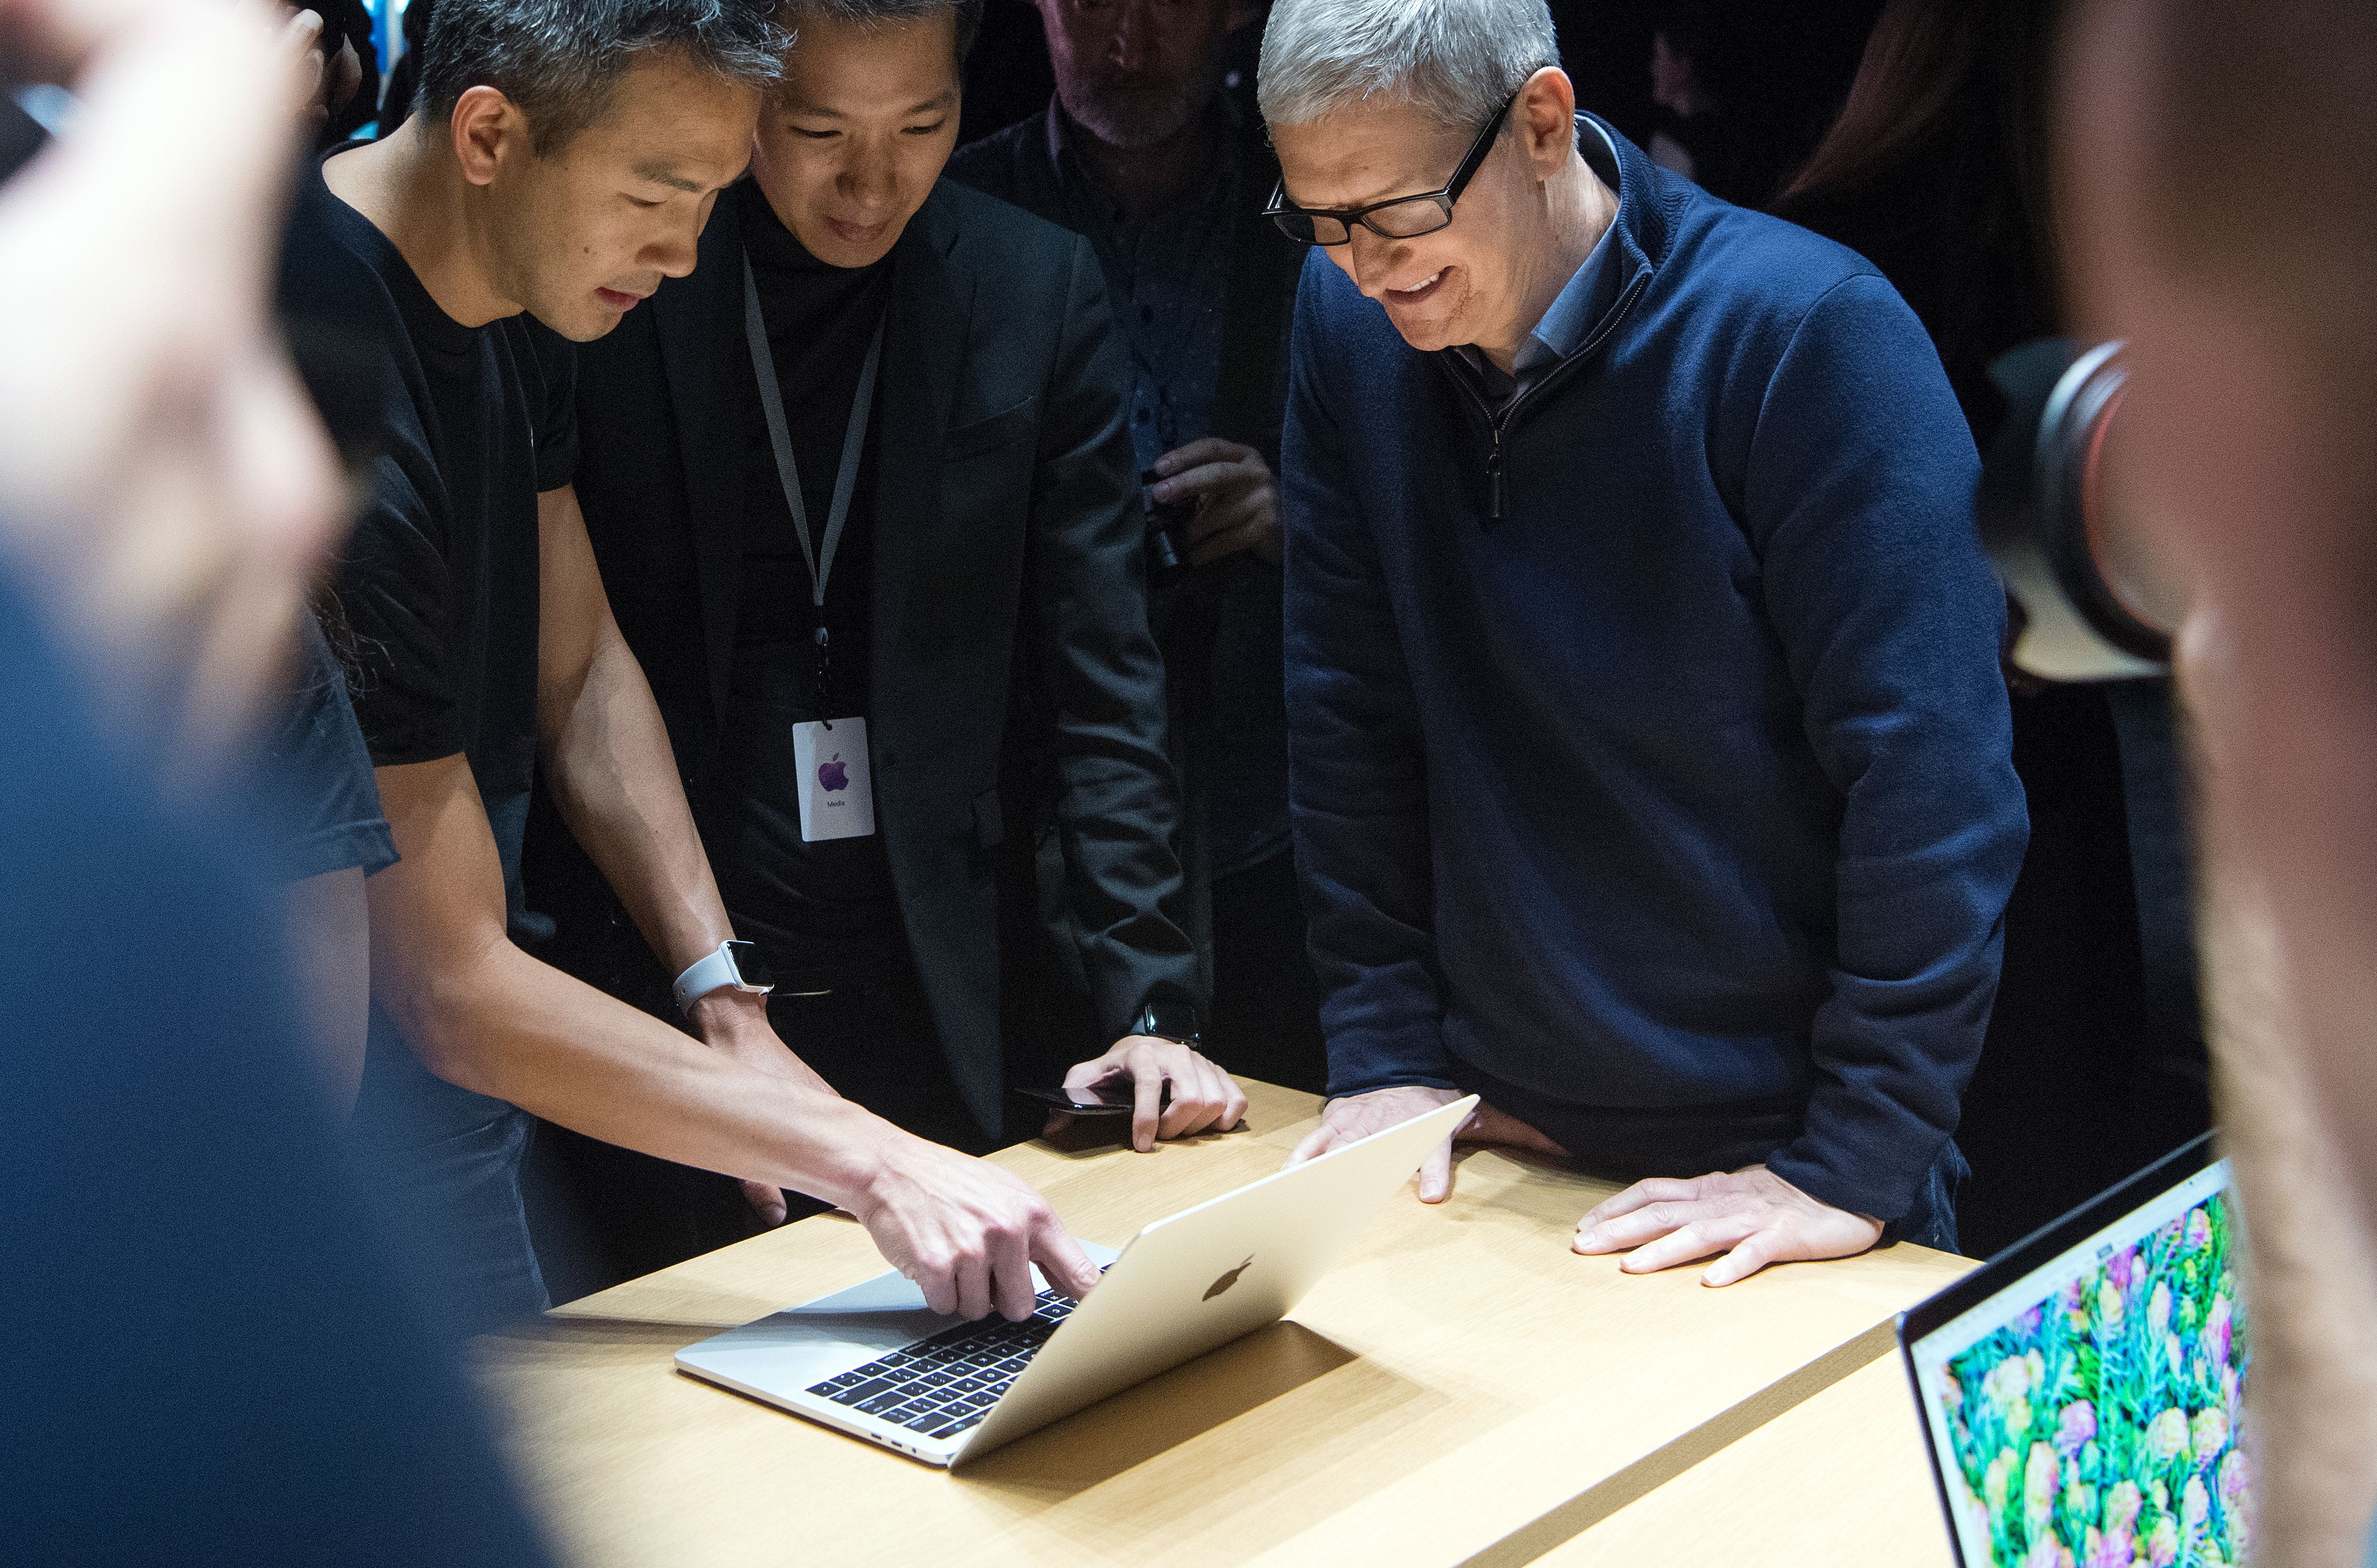 Apple CEO Tim Cook previews a MacBook Pro during a product launch event at Apple headquarters in Cupertino, Calif. on Oct. 27, 2016. (Josh Edelson—AFP/Getty Images)